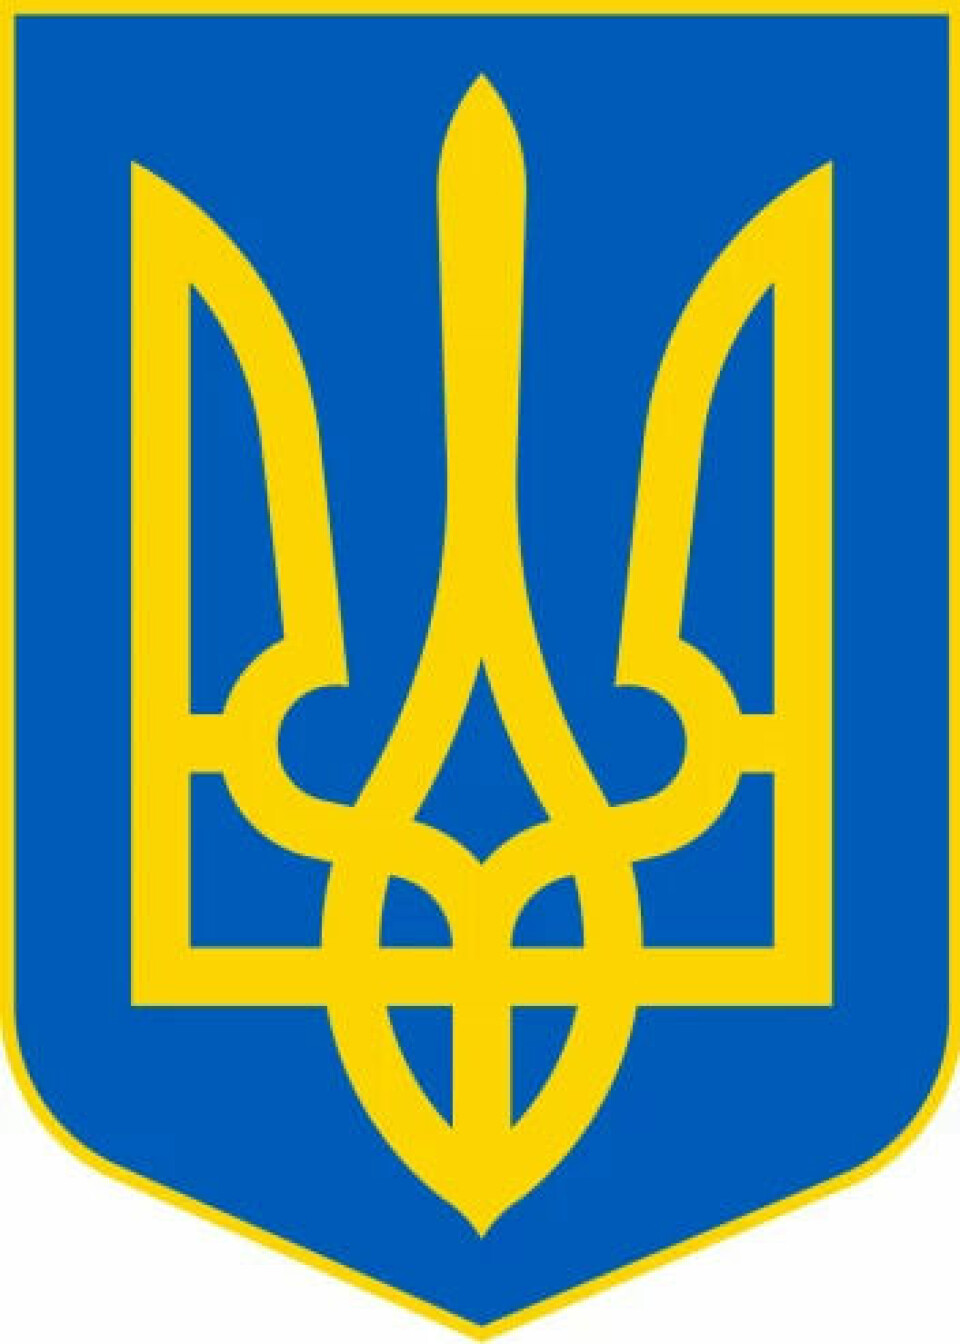 Ukraine’s national coat of arms is the three-pronged spear. The princes of Kyivan Rus’ used the symbol with the trident (Tryzub in Ukrainian) in multiple ways, such as on church buildings, in seals and on coins, probably as a symbol of Christianity's Holy Trinity. The very oldest traces of the symbol can be found in the first Viking prince Rurik's Kyivan Rus’ kingdom with its headquarters in Novgorod in the 8th century.